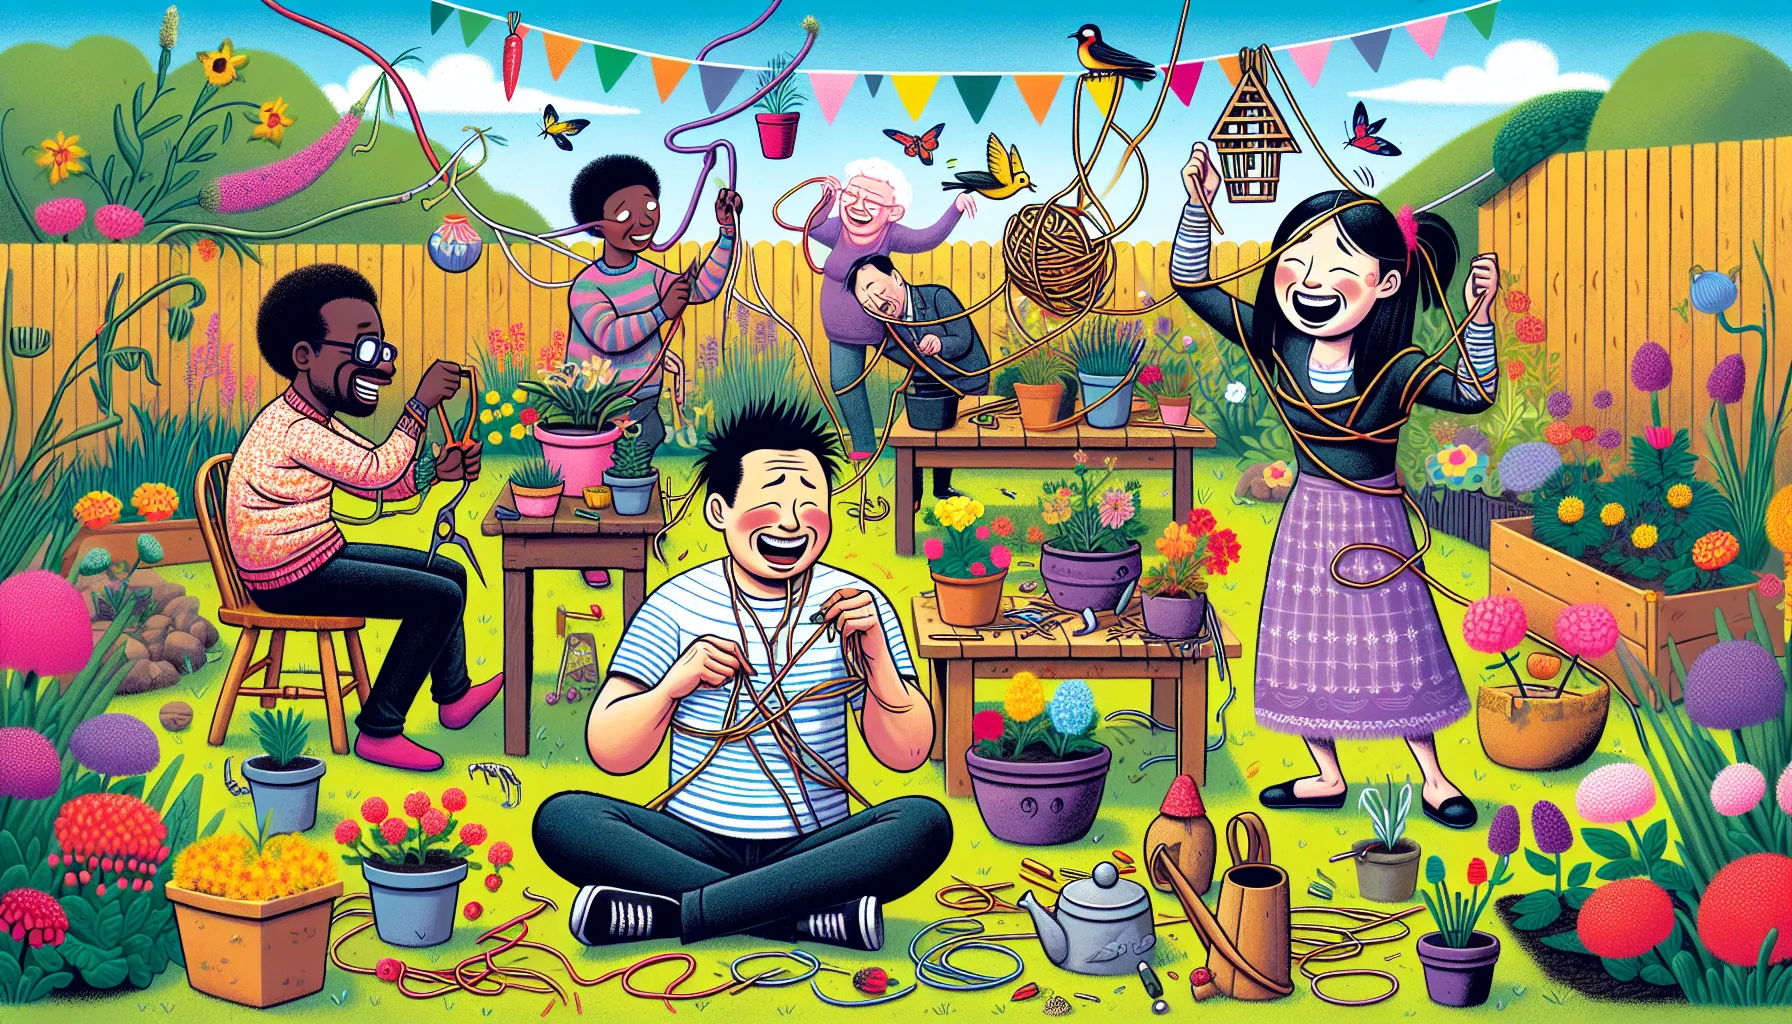 Create a colourful and whimsical illustration of a comedic garden scenario. Picture a group of people of diverse descents such as Asian, Hispanic, Black, and Middle Eastern each engaged in different DIY garden crafts. Perhaps a Middle Eastern gentleman is tangled in a colourful string of flower garlands, while an Asian woman is laughing, holding a crookedly painted pot. A Hispanic girl is seen crafting a clumsy birdhouse, the bird confusedly perching on her head. A Black man is attempting to carve a wooden gnome, yet it appears more like an abstract sculpture. This humorous scene is set in a scenic backyard garden laden with vibrant flora, sprouting veggies, and buzzing insects.